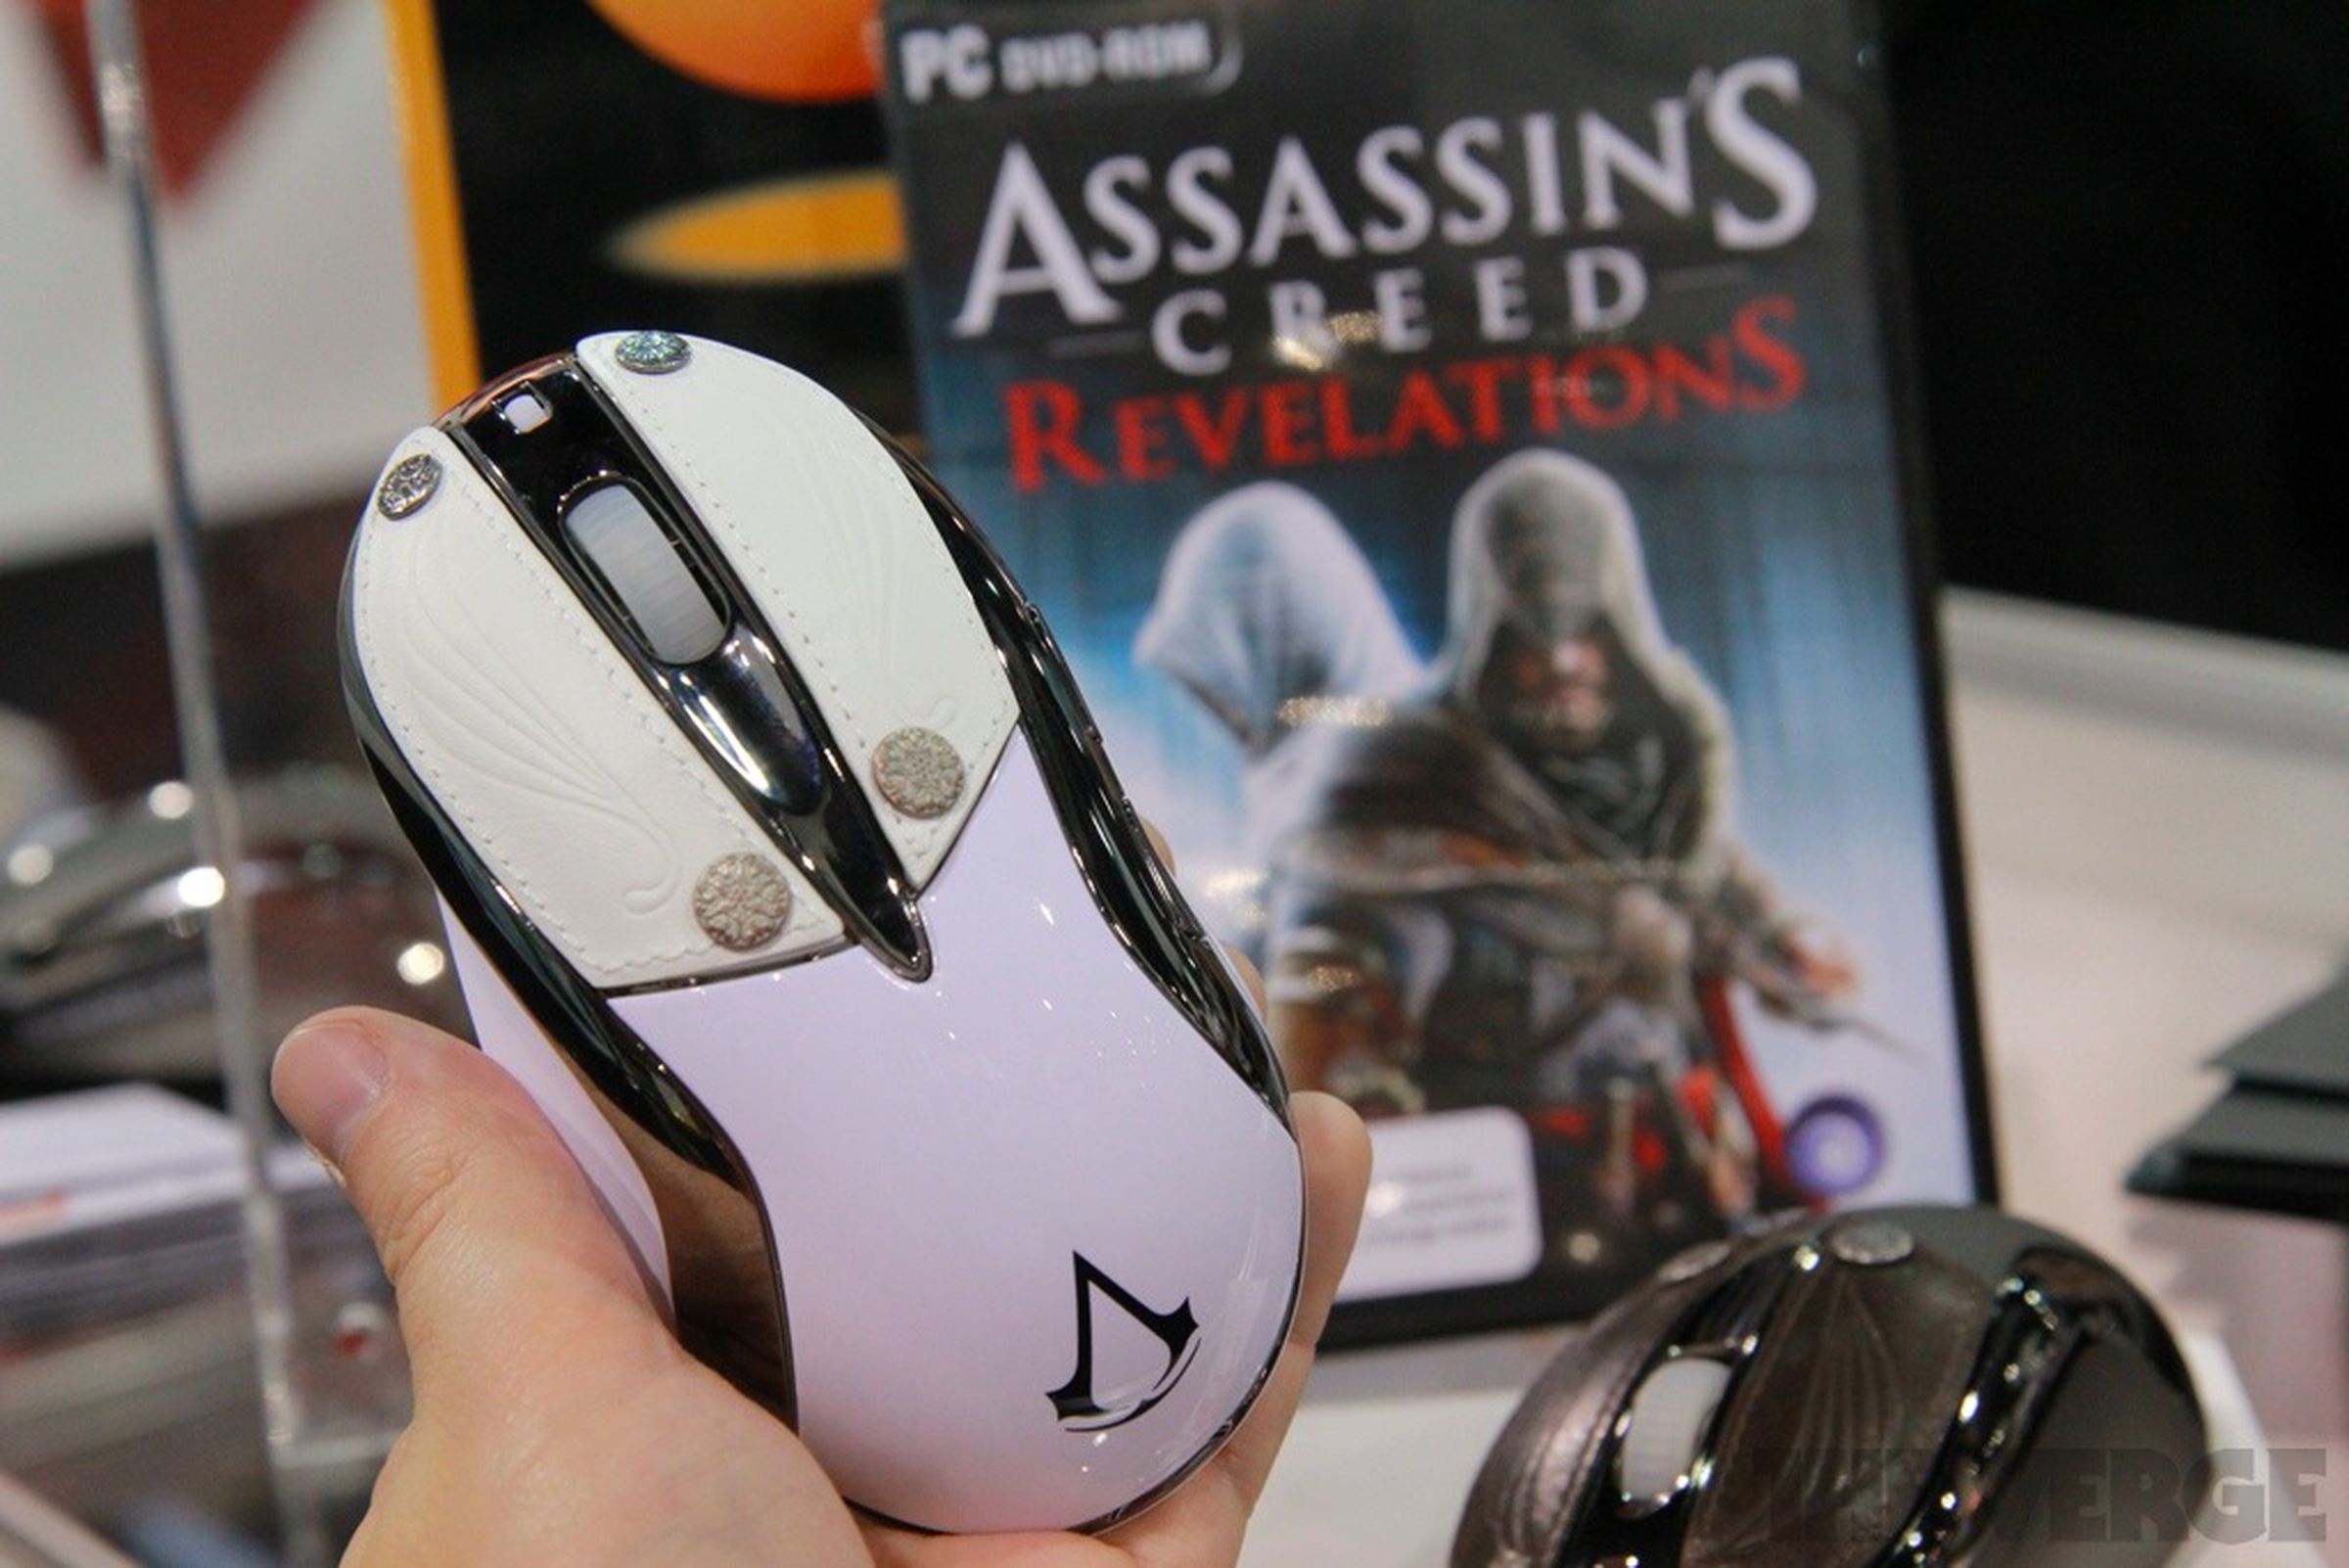 Shogun Bros. Assassin's Creed Chameleon X-1 hands-on pictures